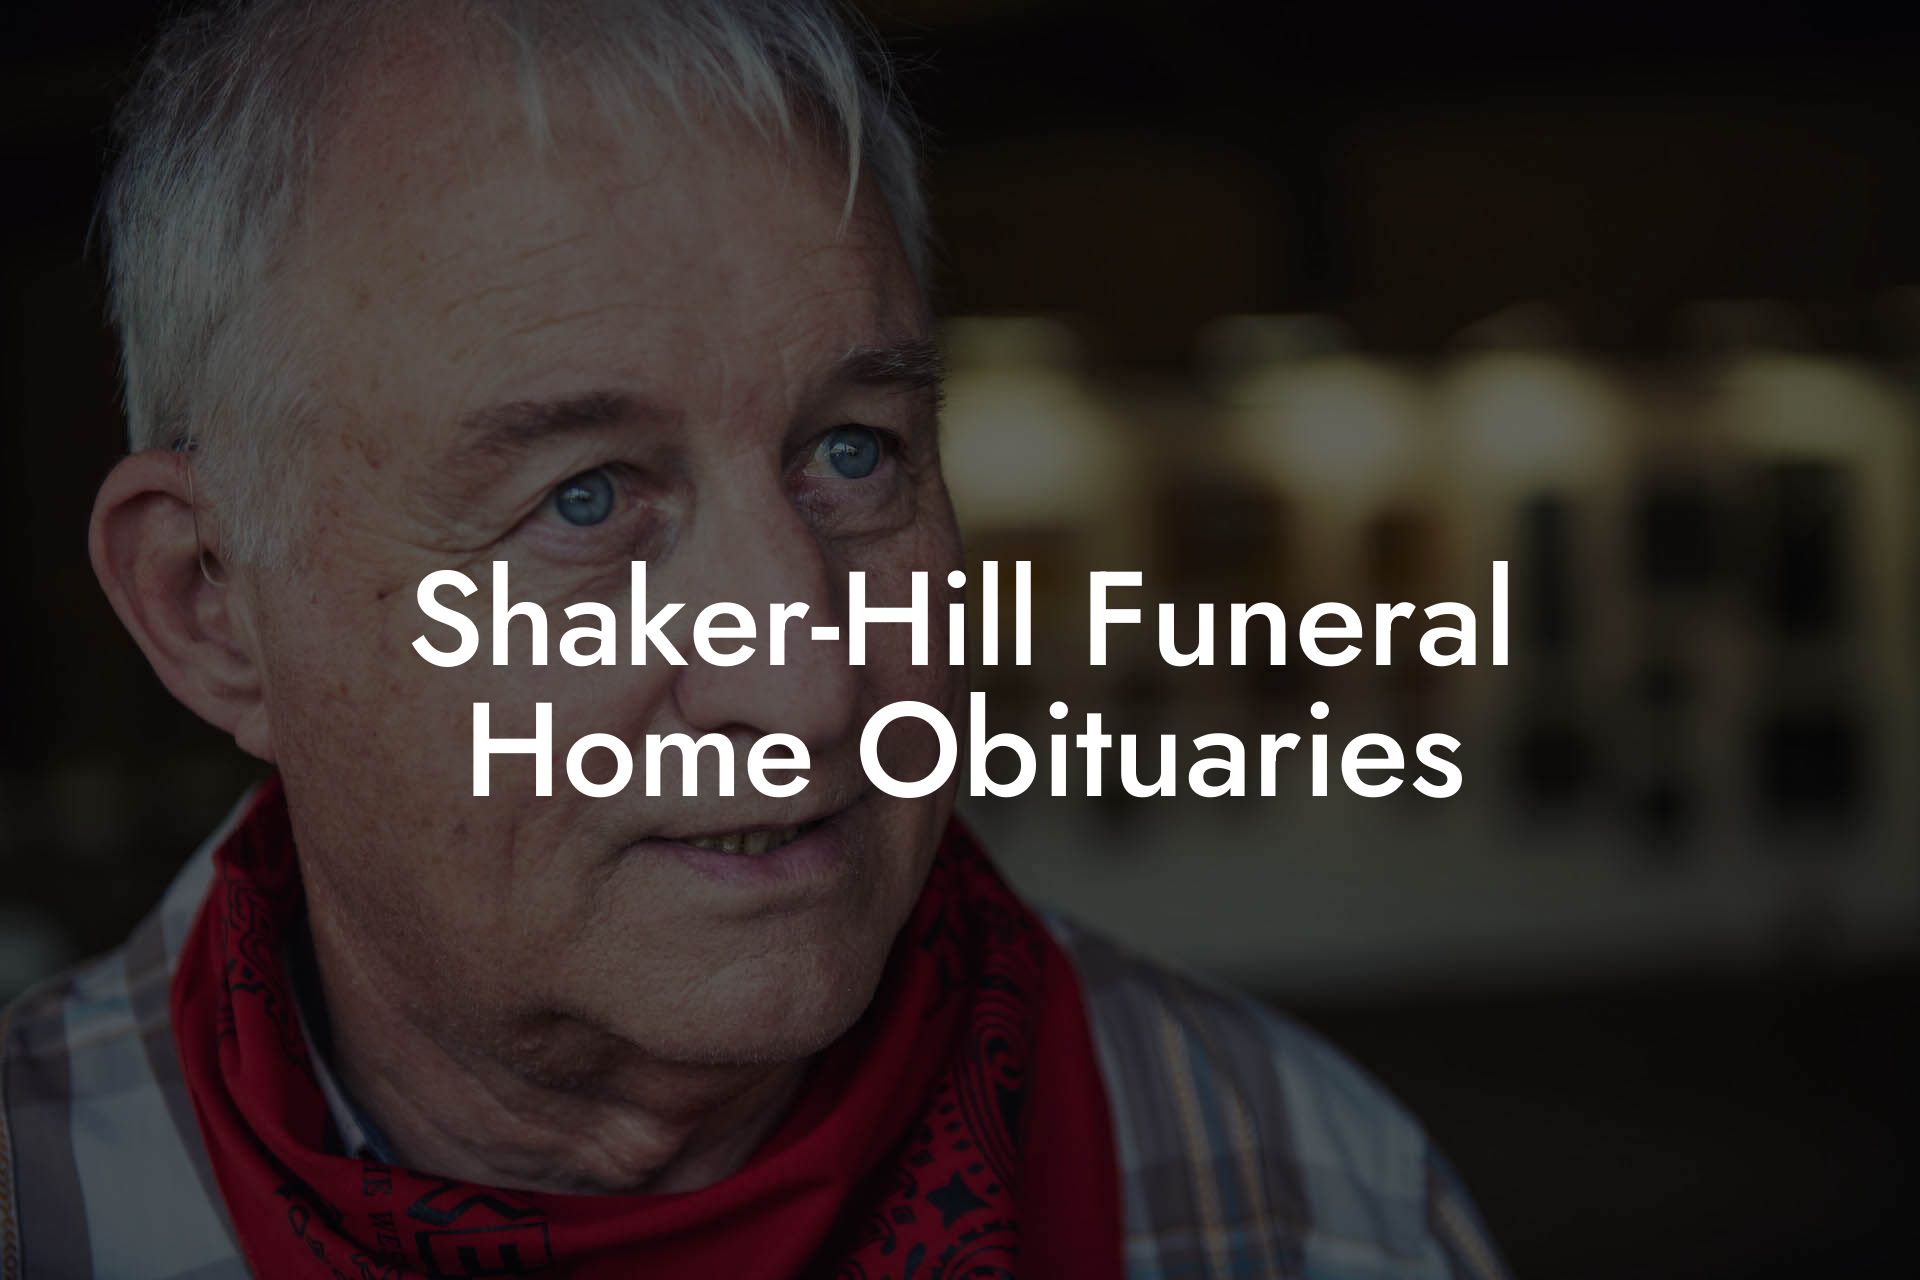 Shaker-Hill Funeral Home Obituaries